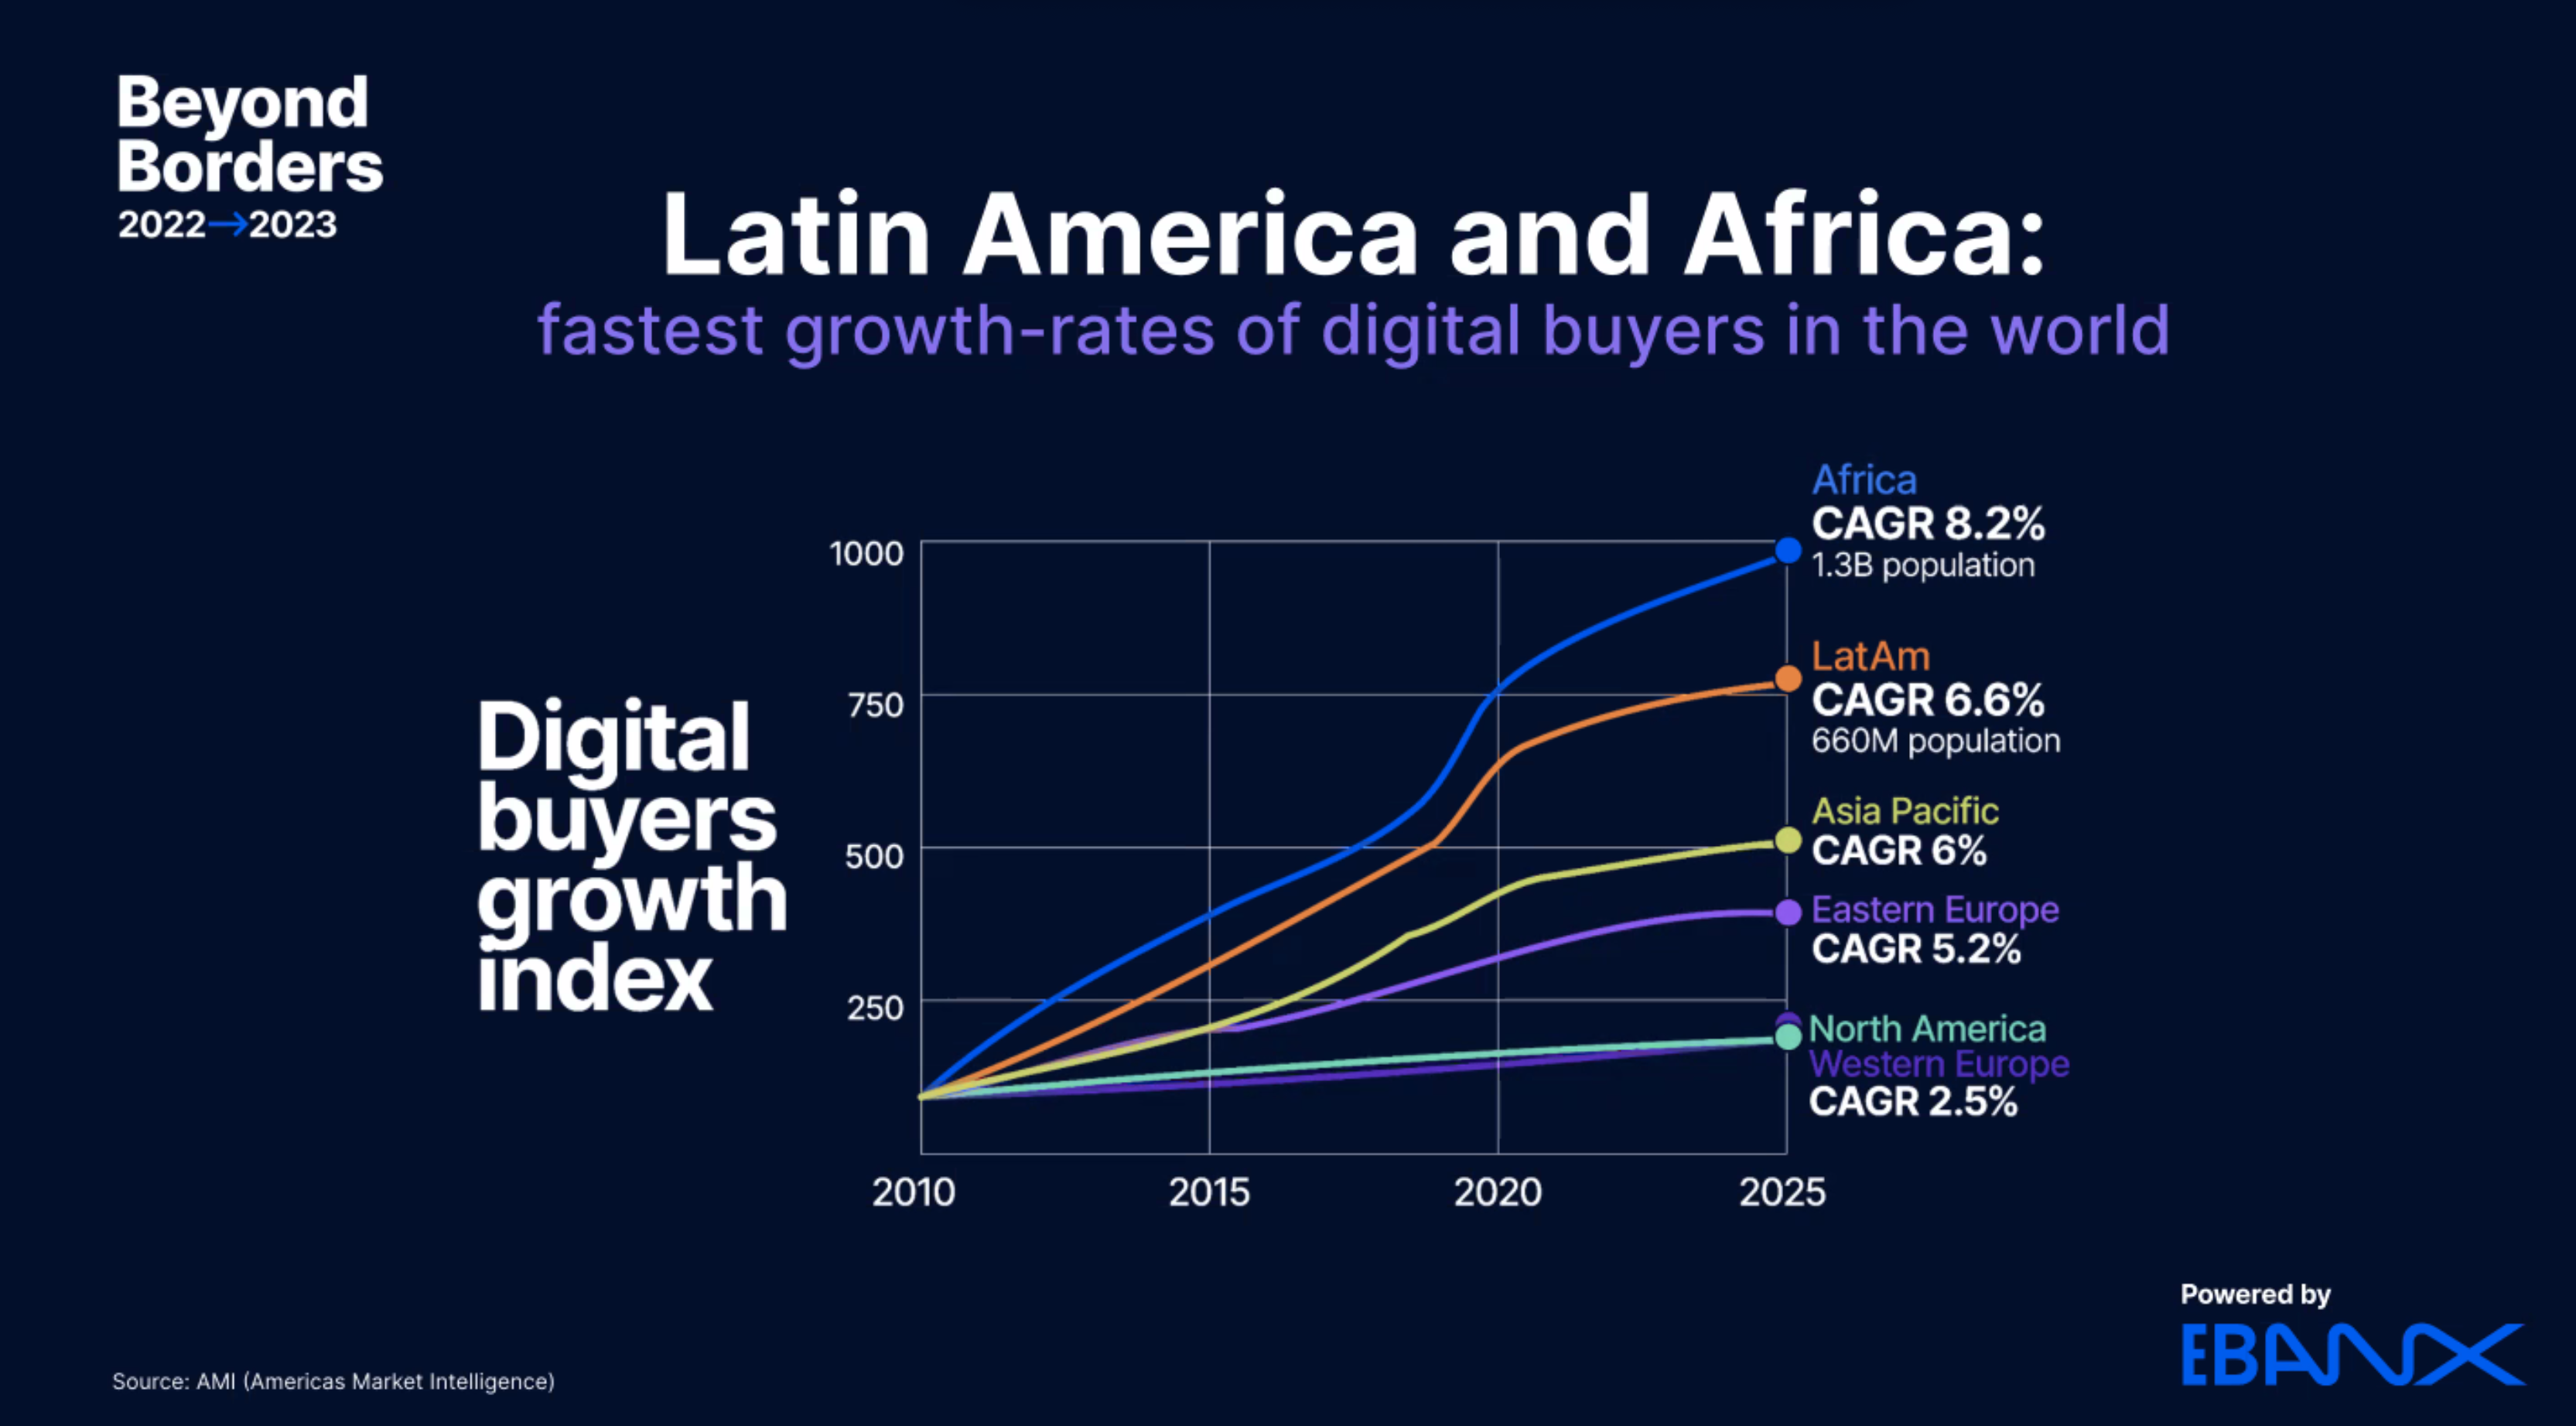 Latin America and Africa: fastest growth-rates of digital buyers in the world